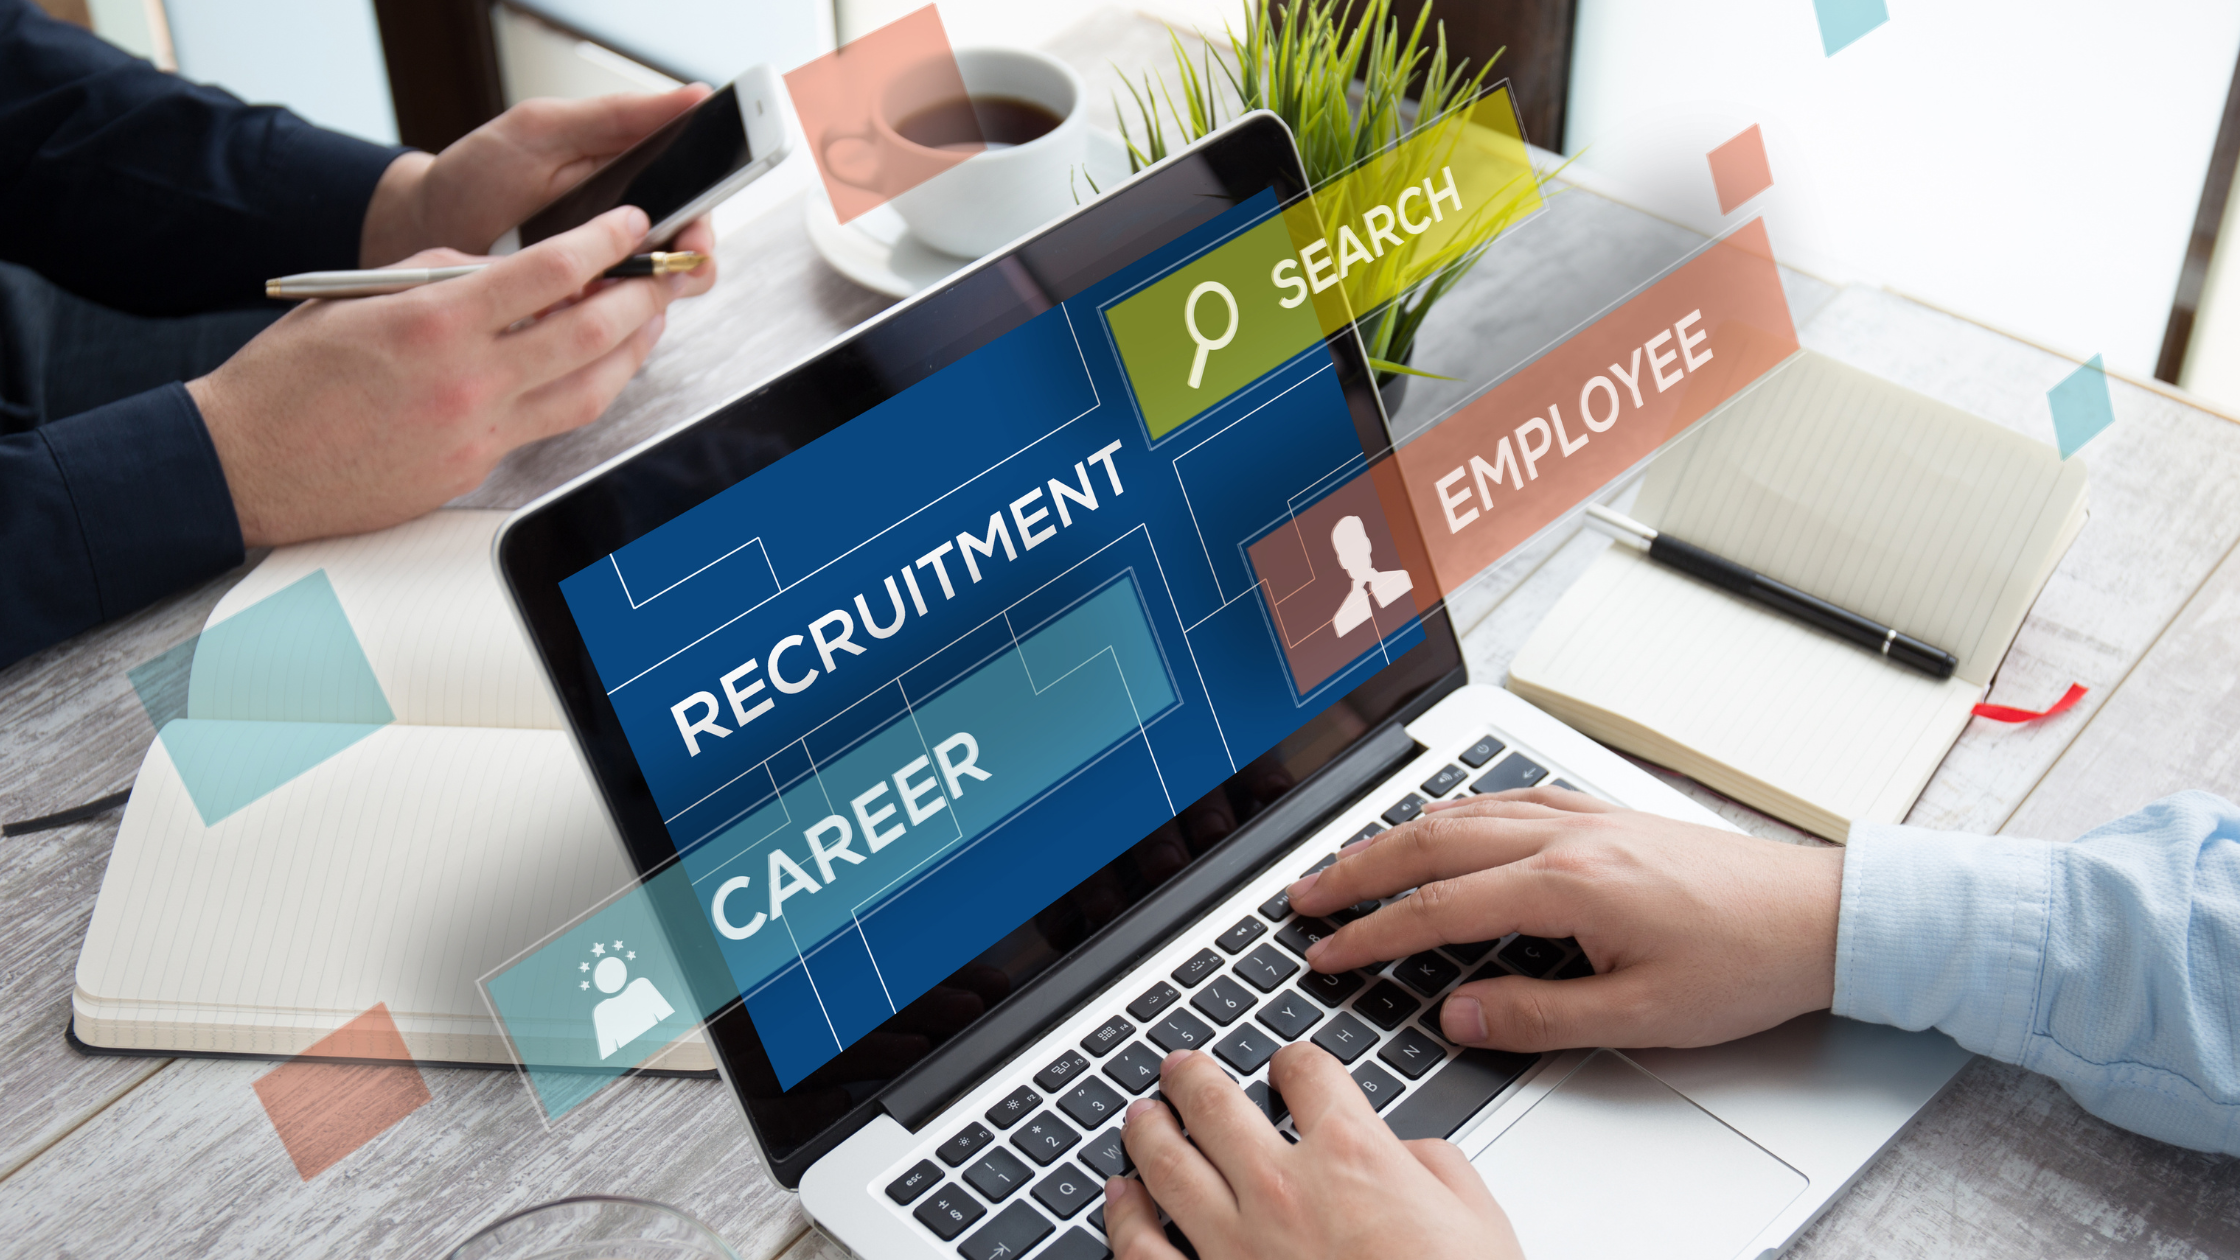 Benefits of using a recruiter: 8 things to consider